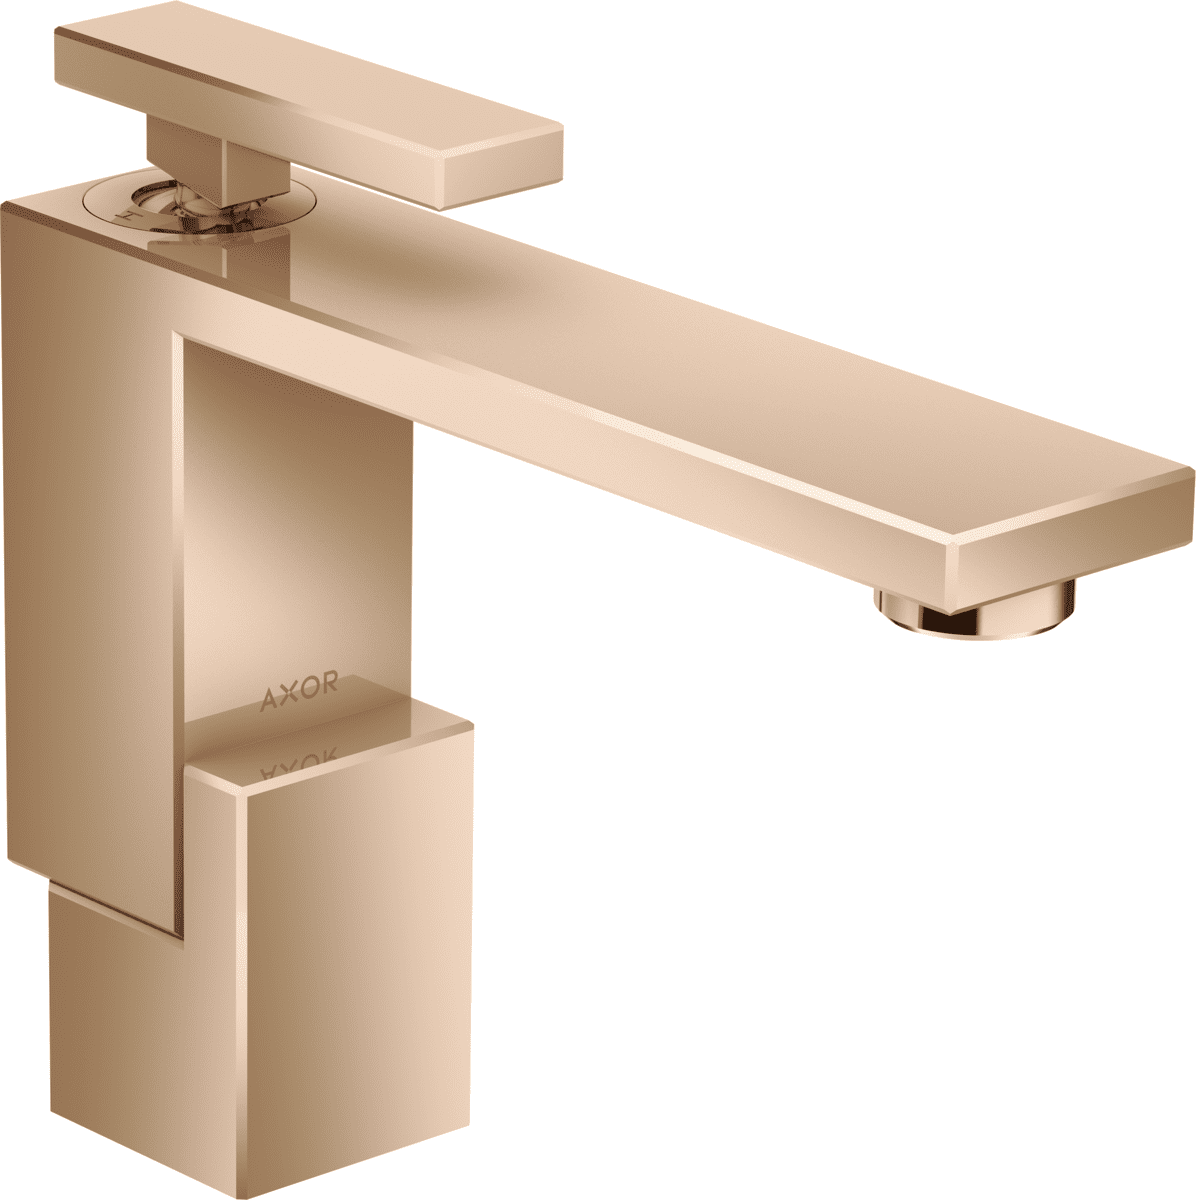 Picture of HANSGROHE AXOR Edge Single lever basin mixer 130 with push-open waste set #46010300 - Polished Red Gold